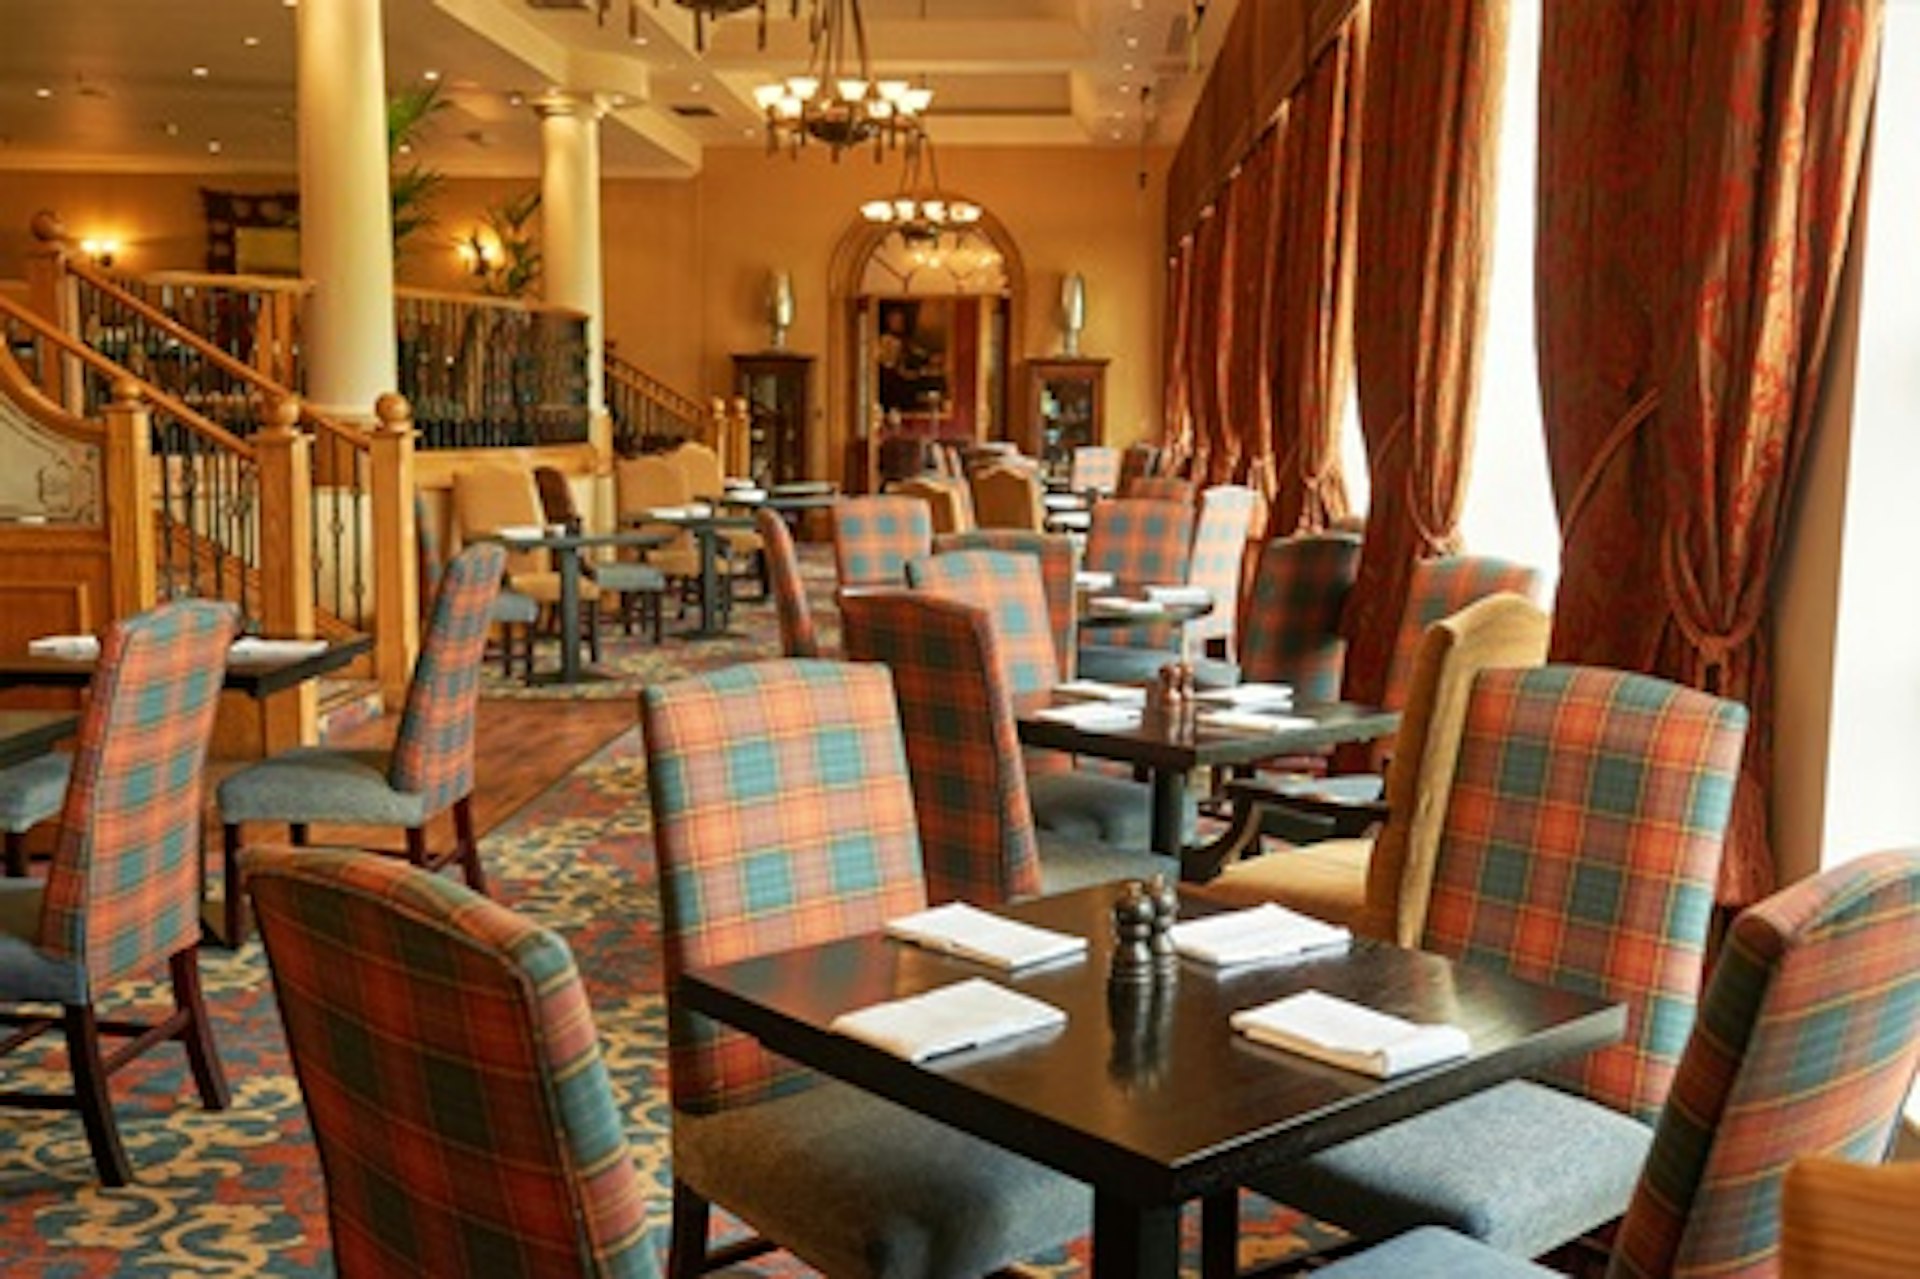 Winter Two Night Scottish Break with Dinner for Two at the 4* Dalmahoy Hotel & Country Club, Edinburgh 3